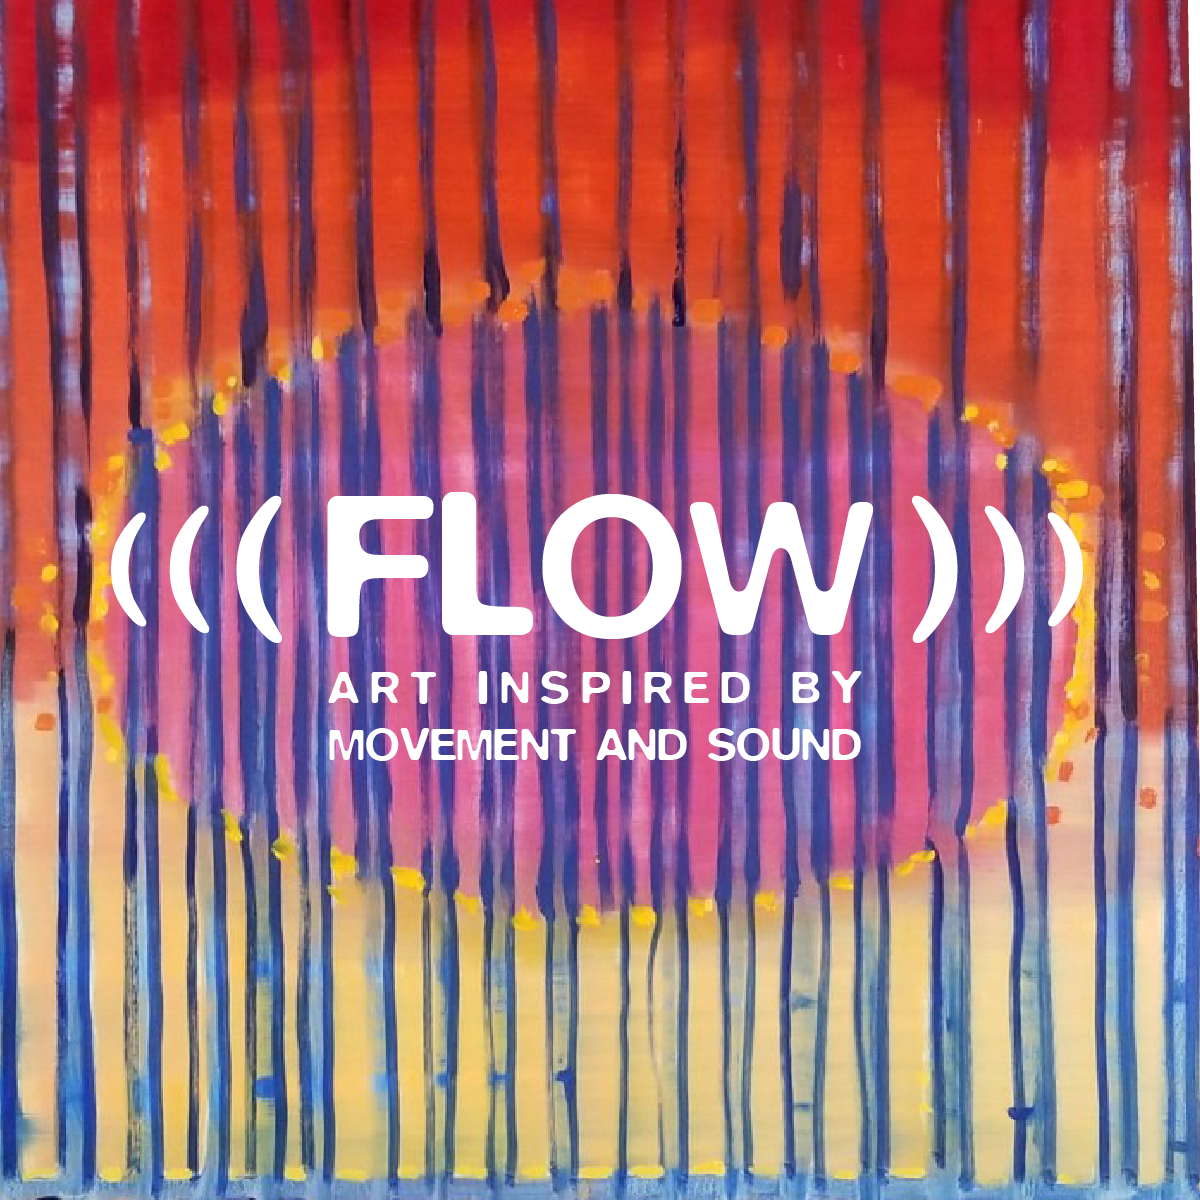 Flow text set to a colorful, painterly image of oscillating purple, reds, oranges, and yellows